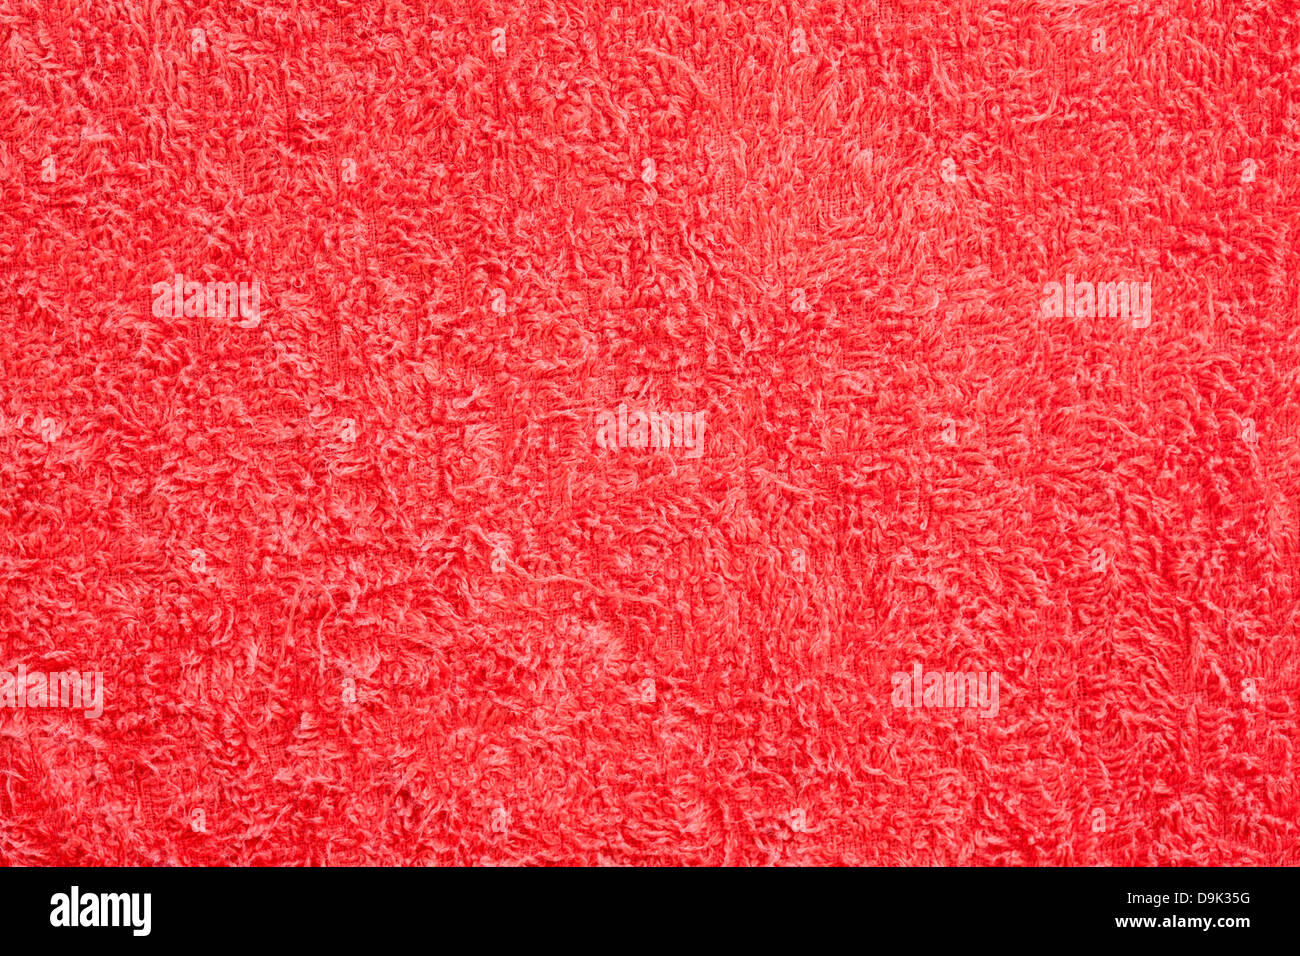 Close up of red soft towel texture background Stock Photo